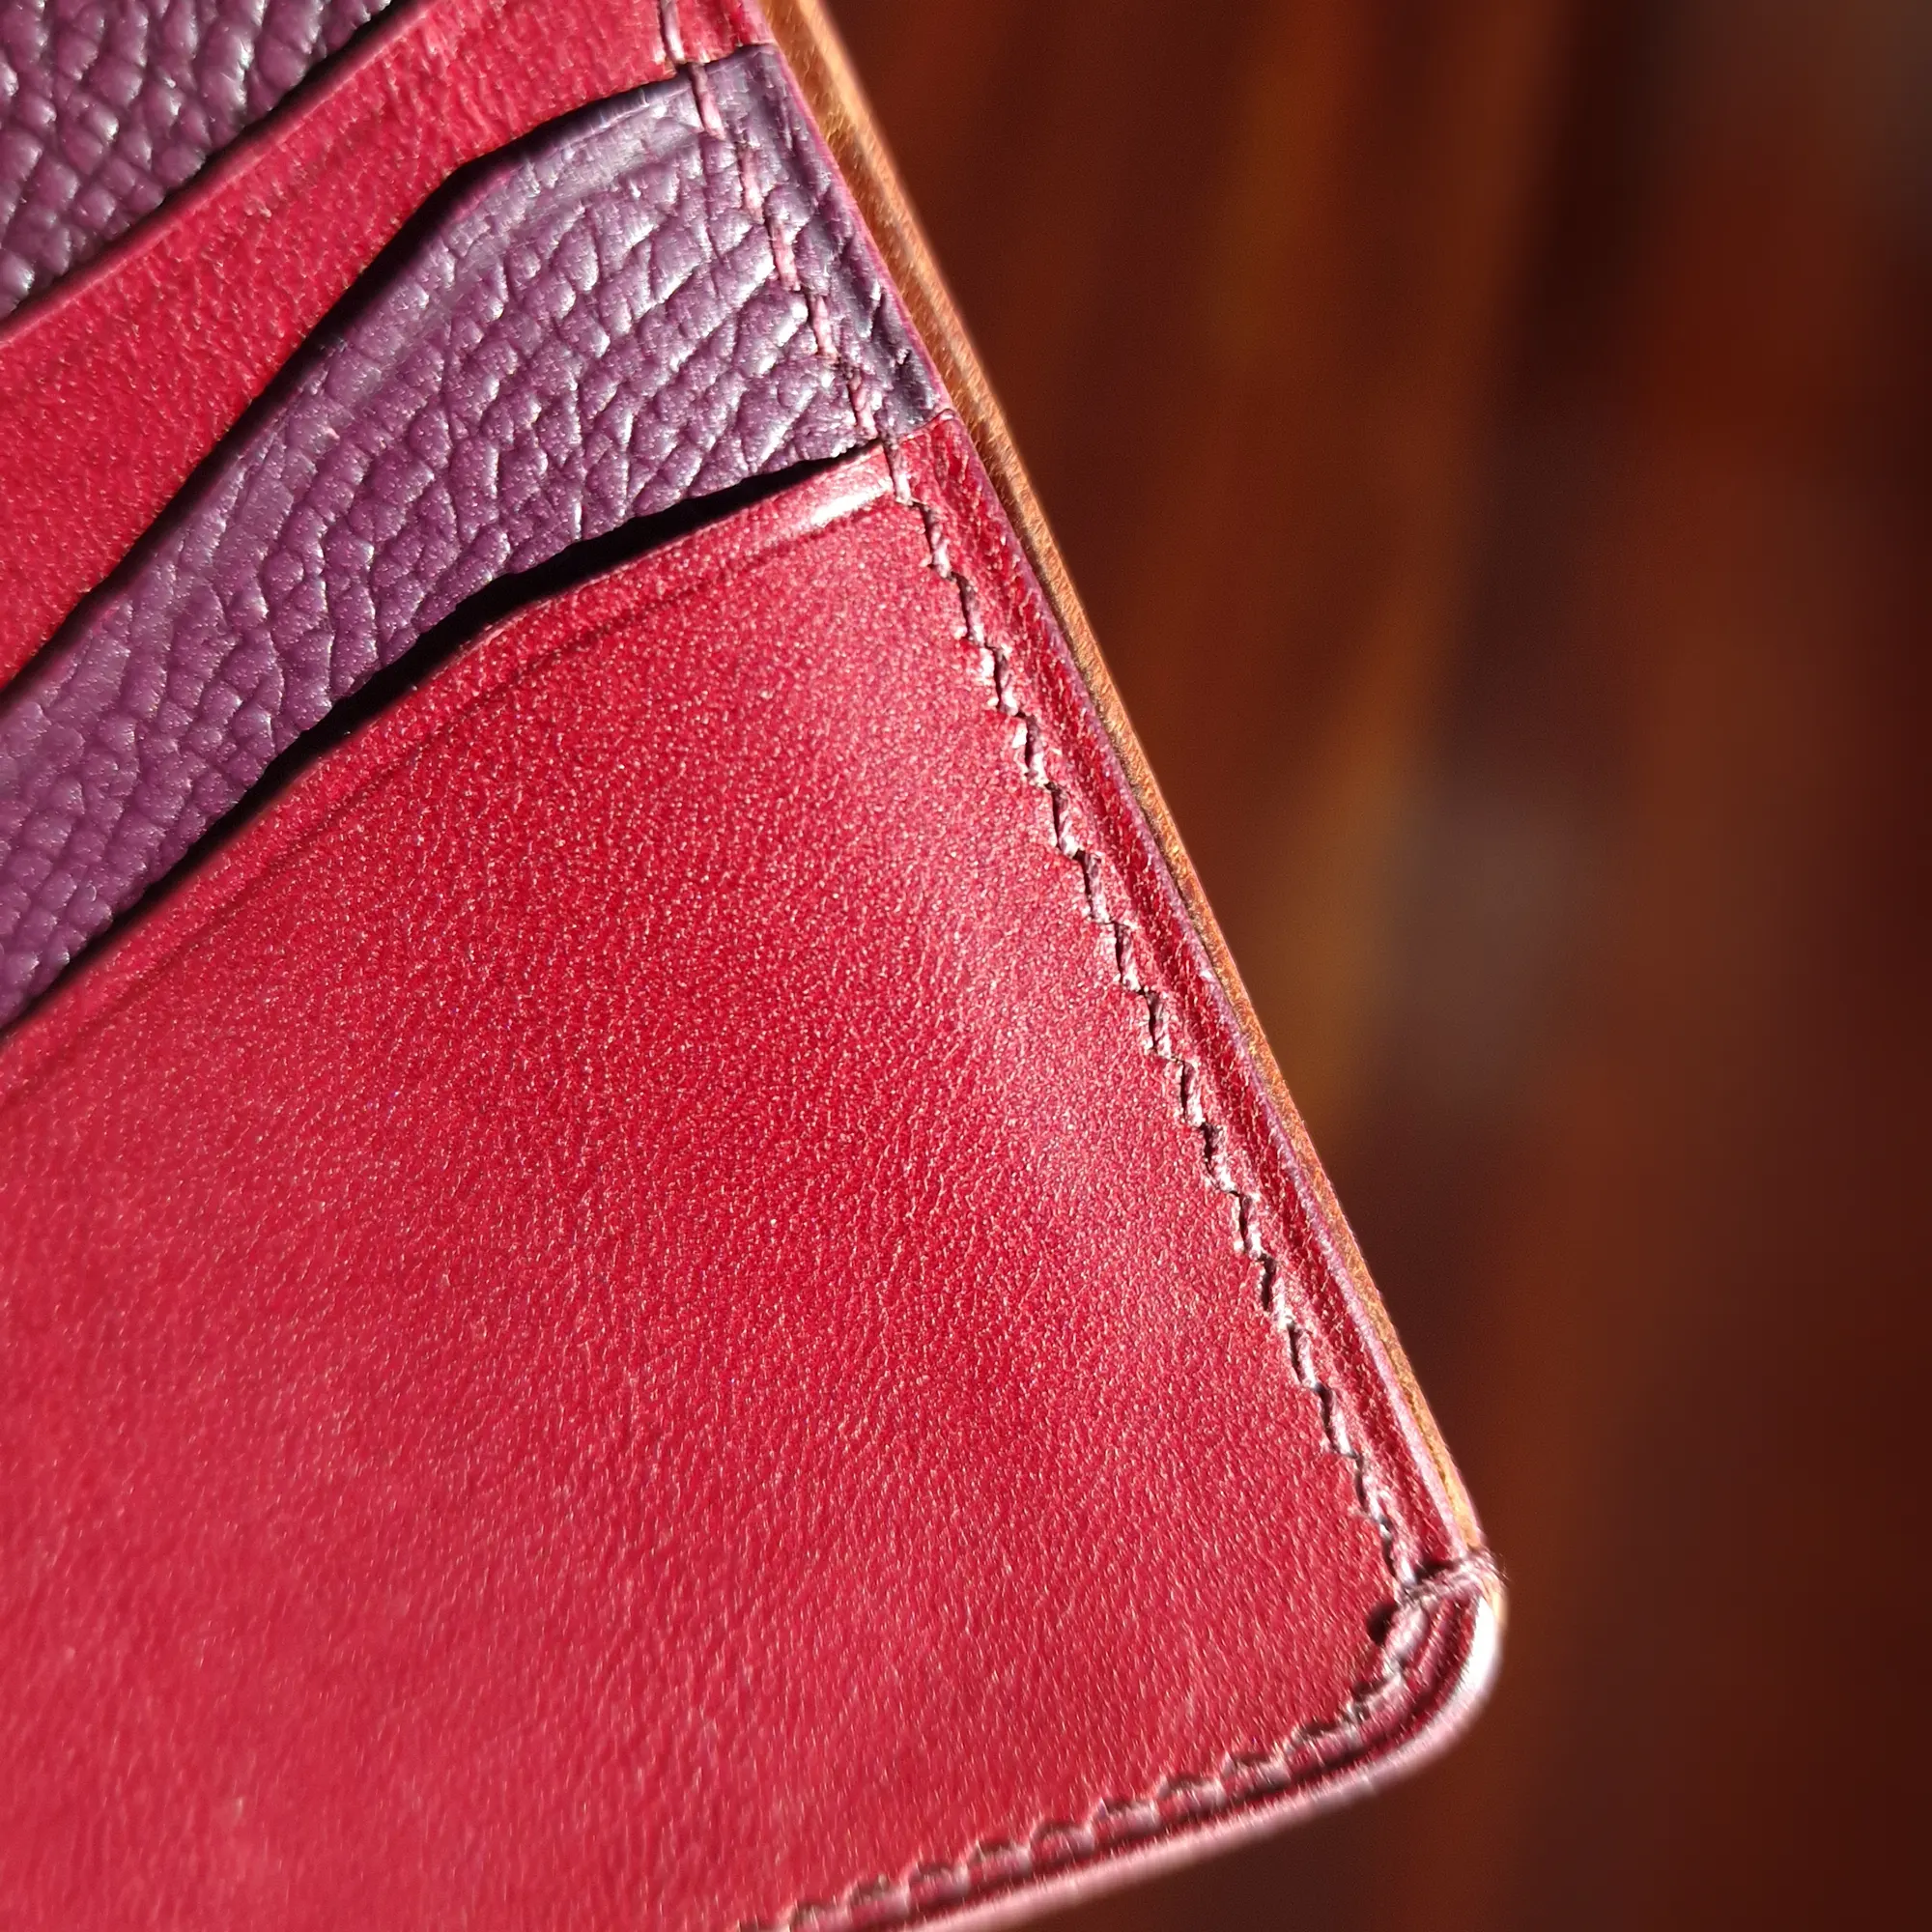 possala designs double looped handmade leather wallet burgundy